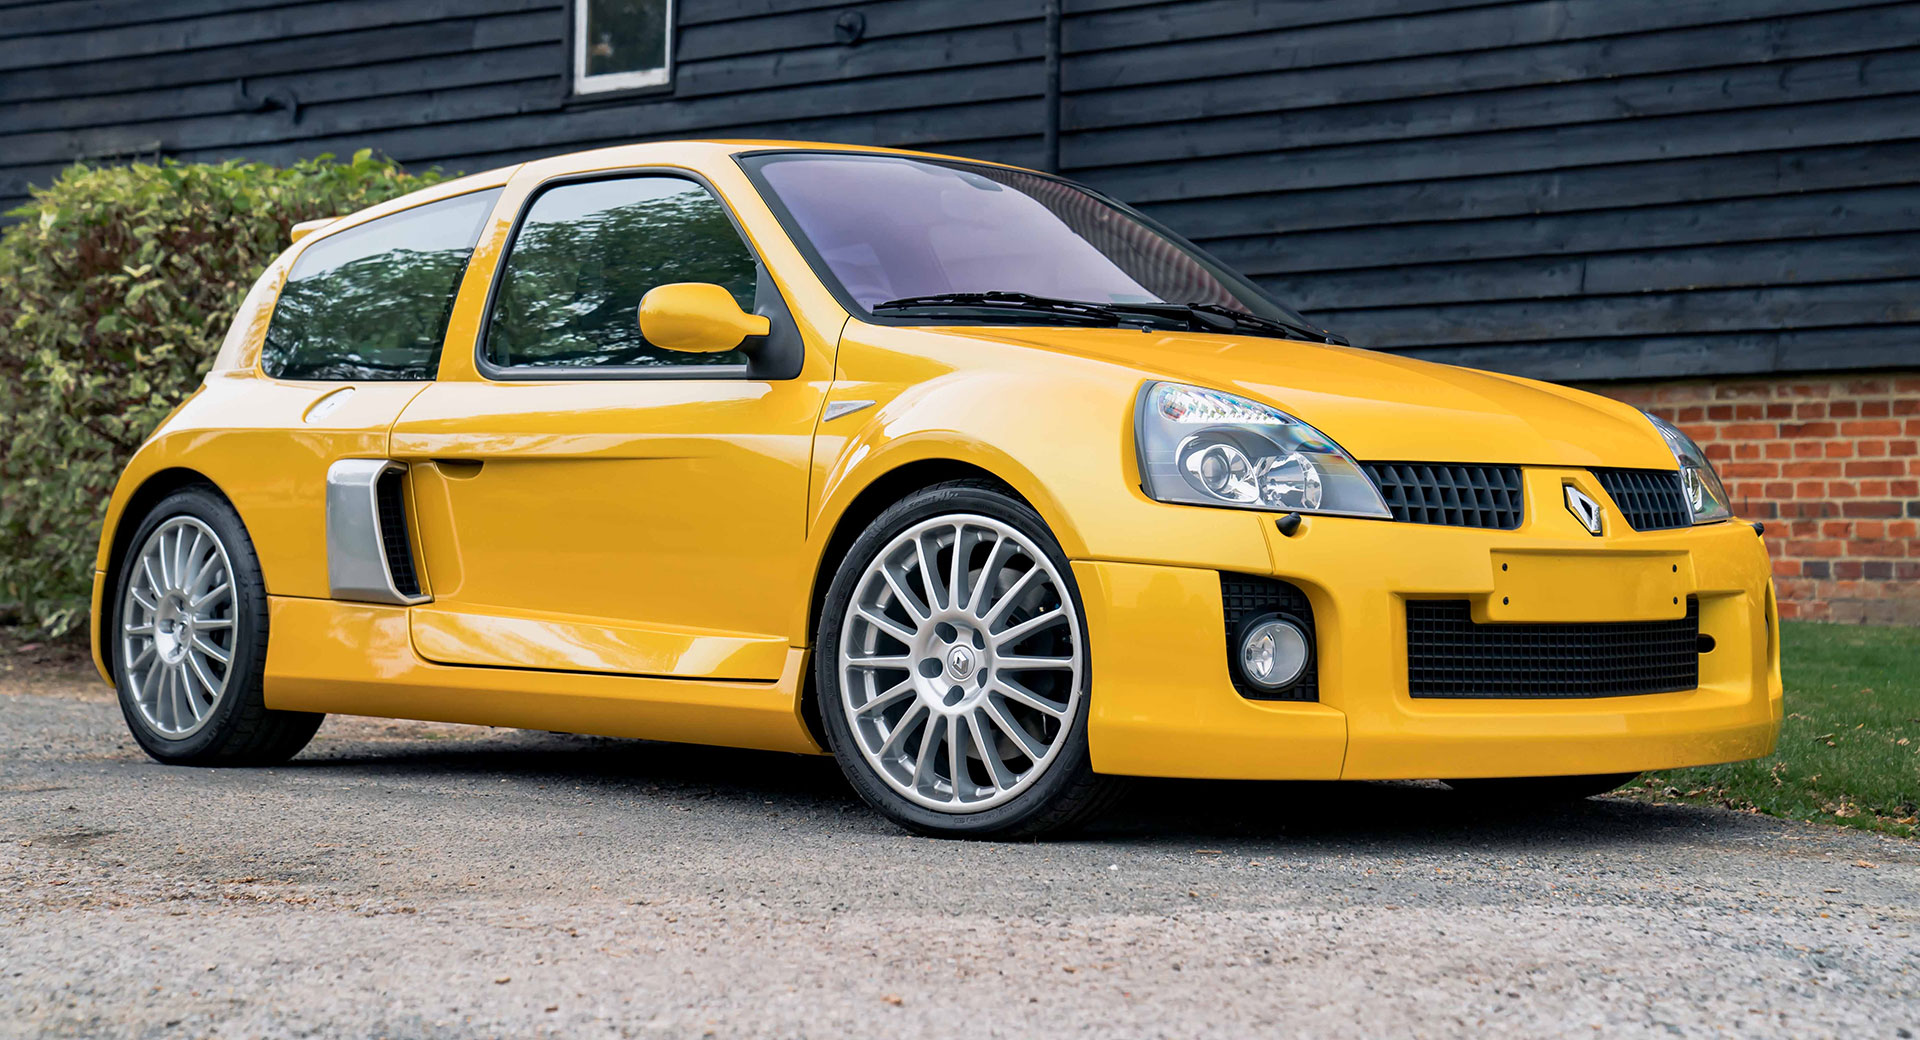 https://www.carscoops.com/wp-content/uploads/2021/10/Renault-Clio-V6-2a.jpg